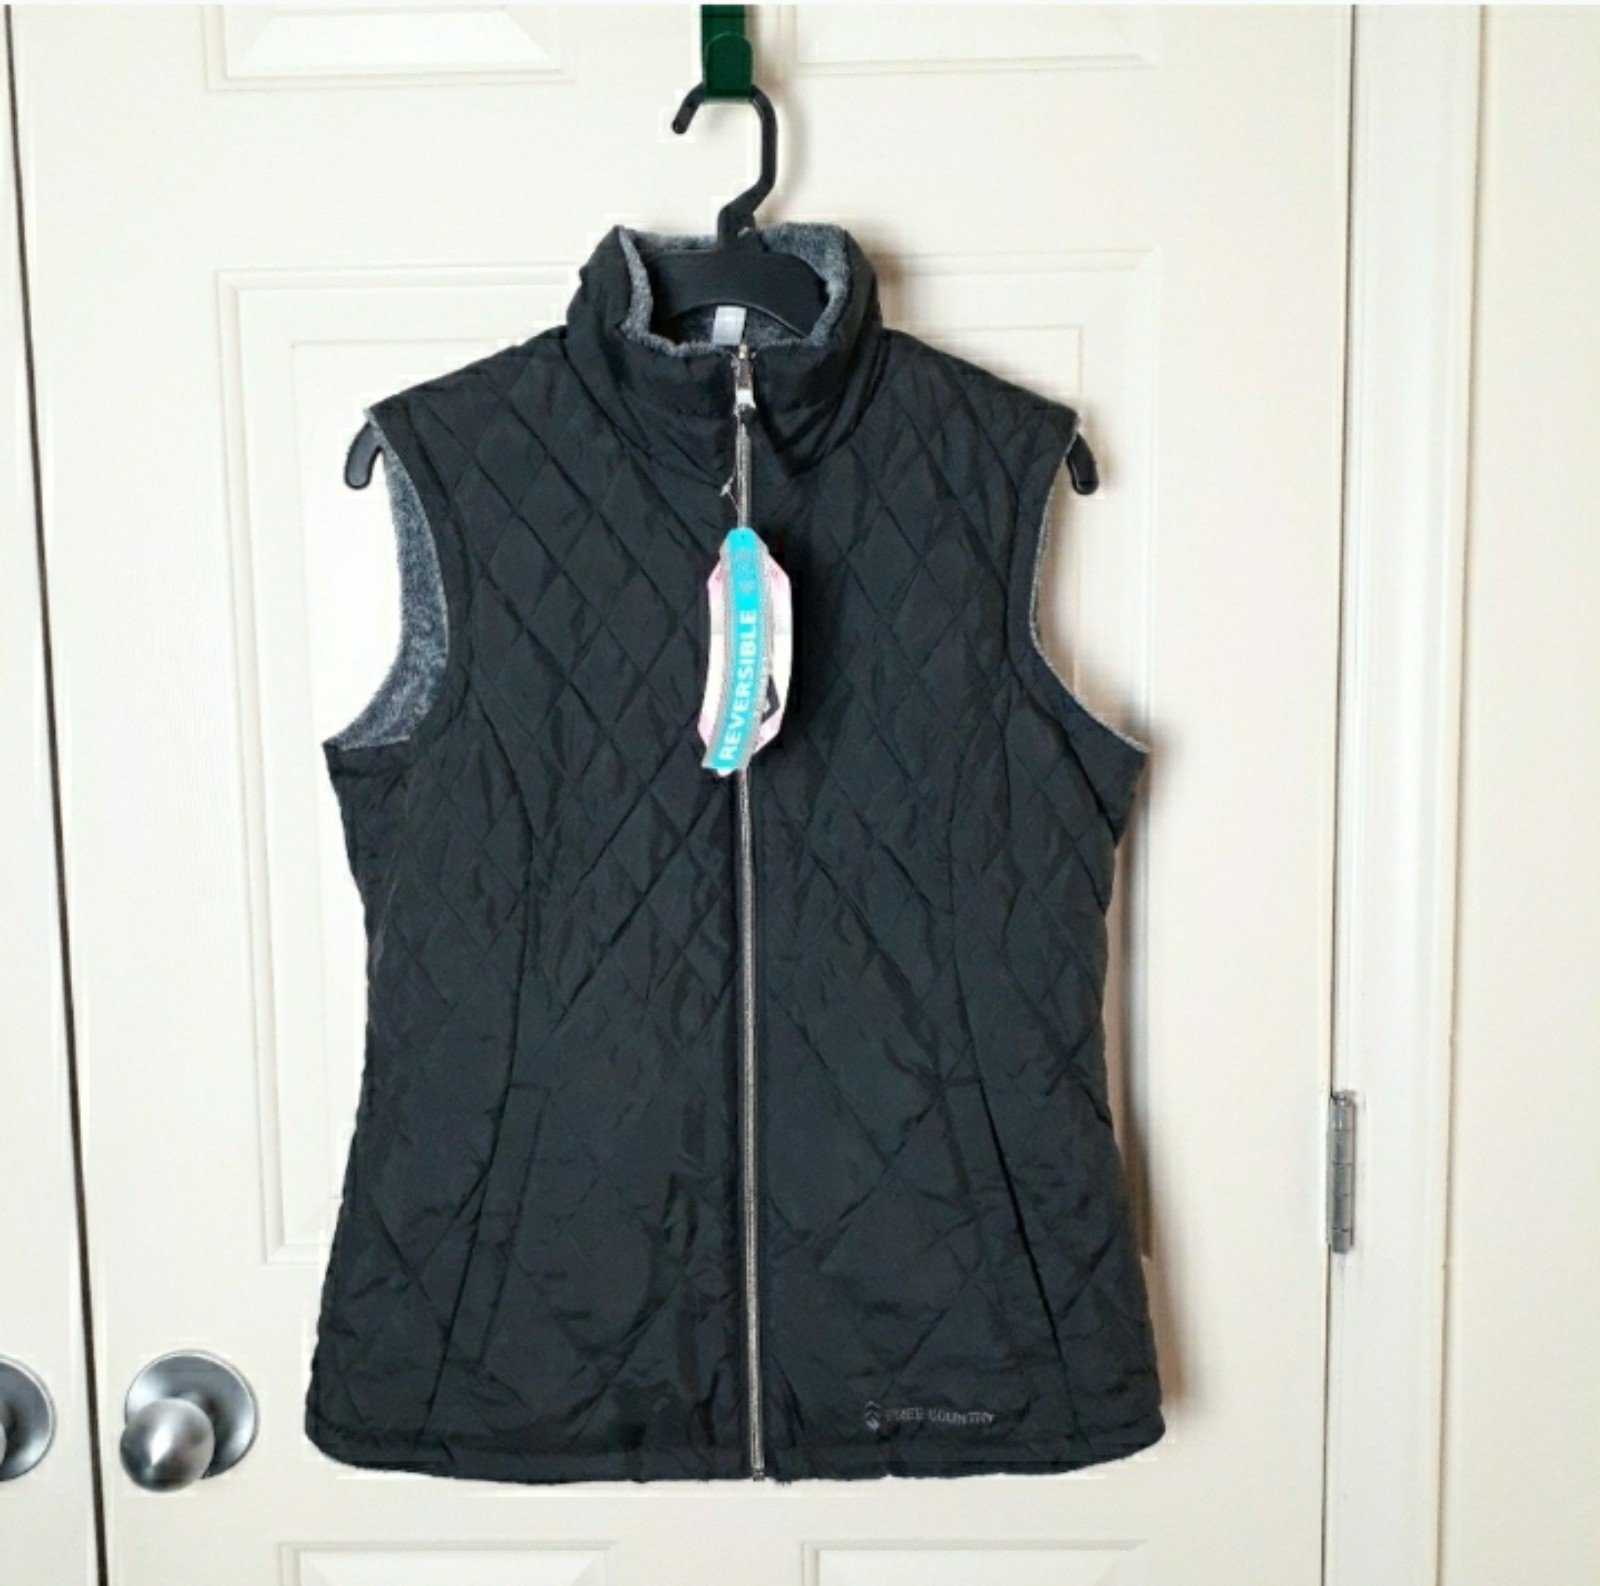 Free Country Women Reversible Vest Size Small Black&Gra